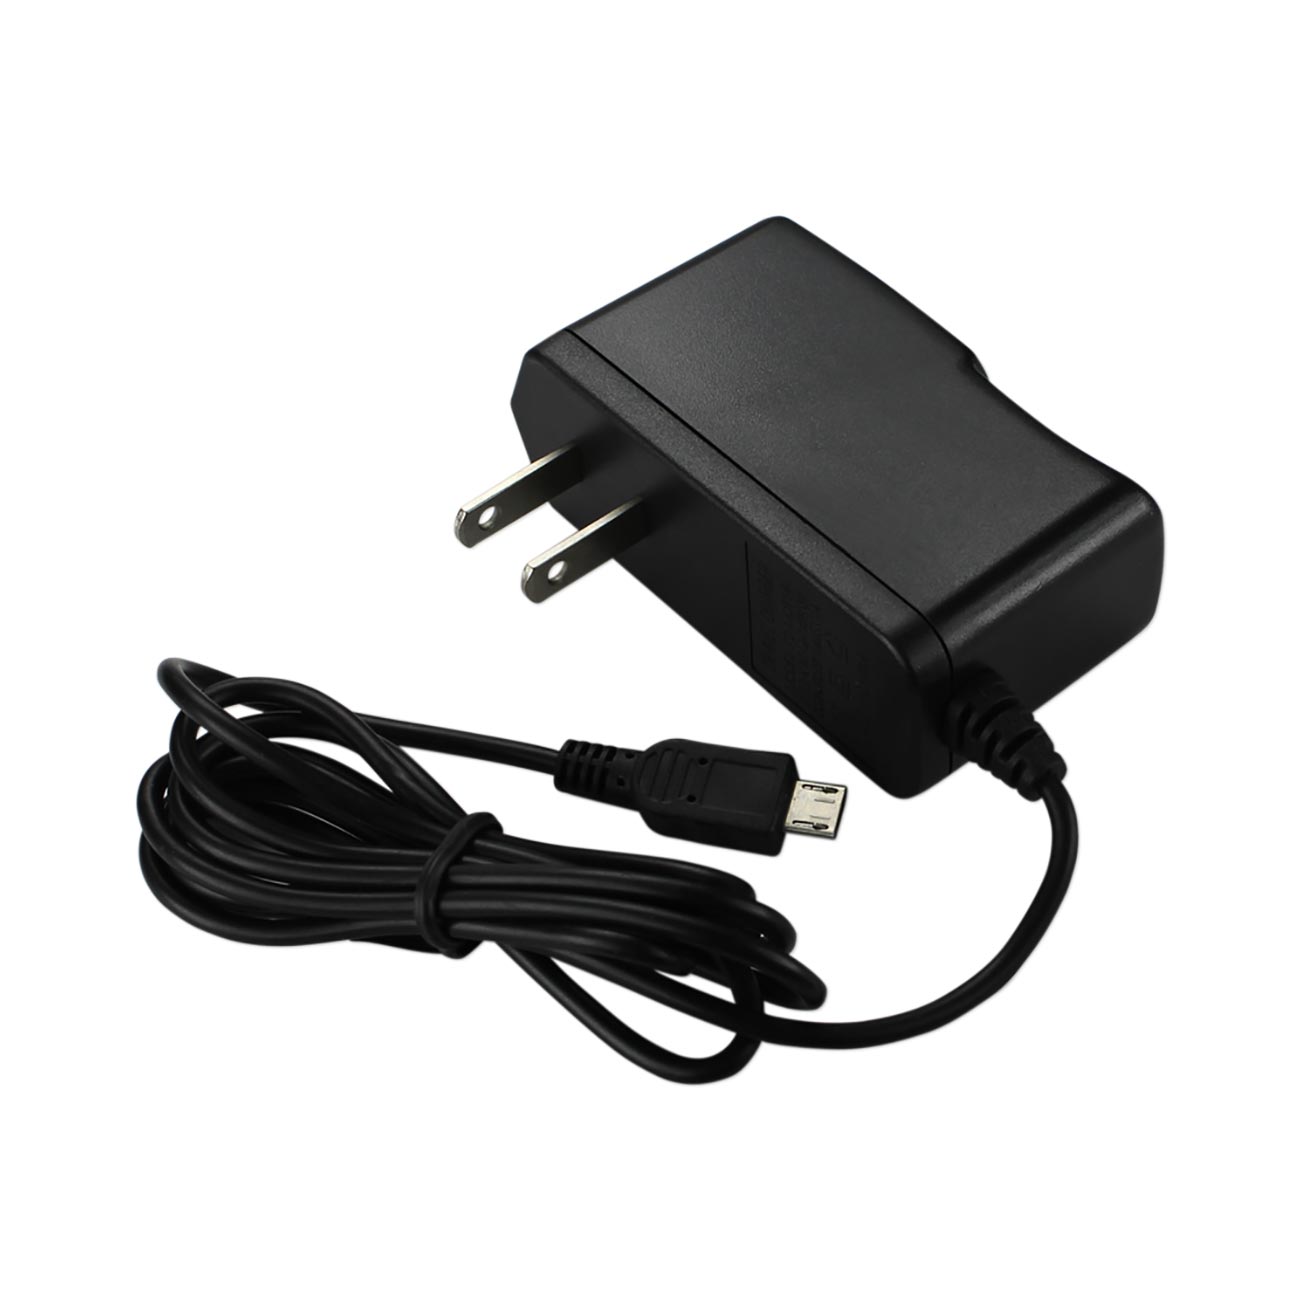 Reiko Portable Micro USB Travel Adapter Charger With Built In Cable In Black